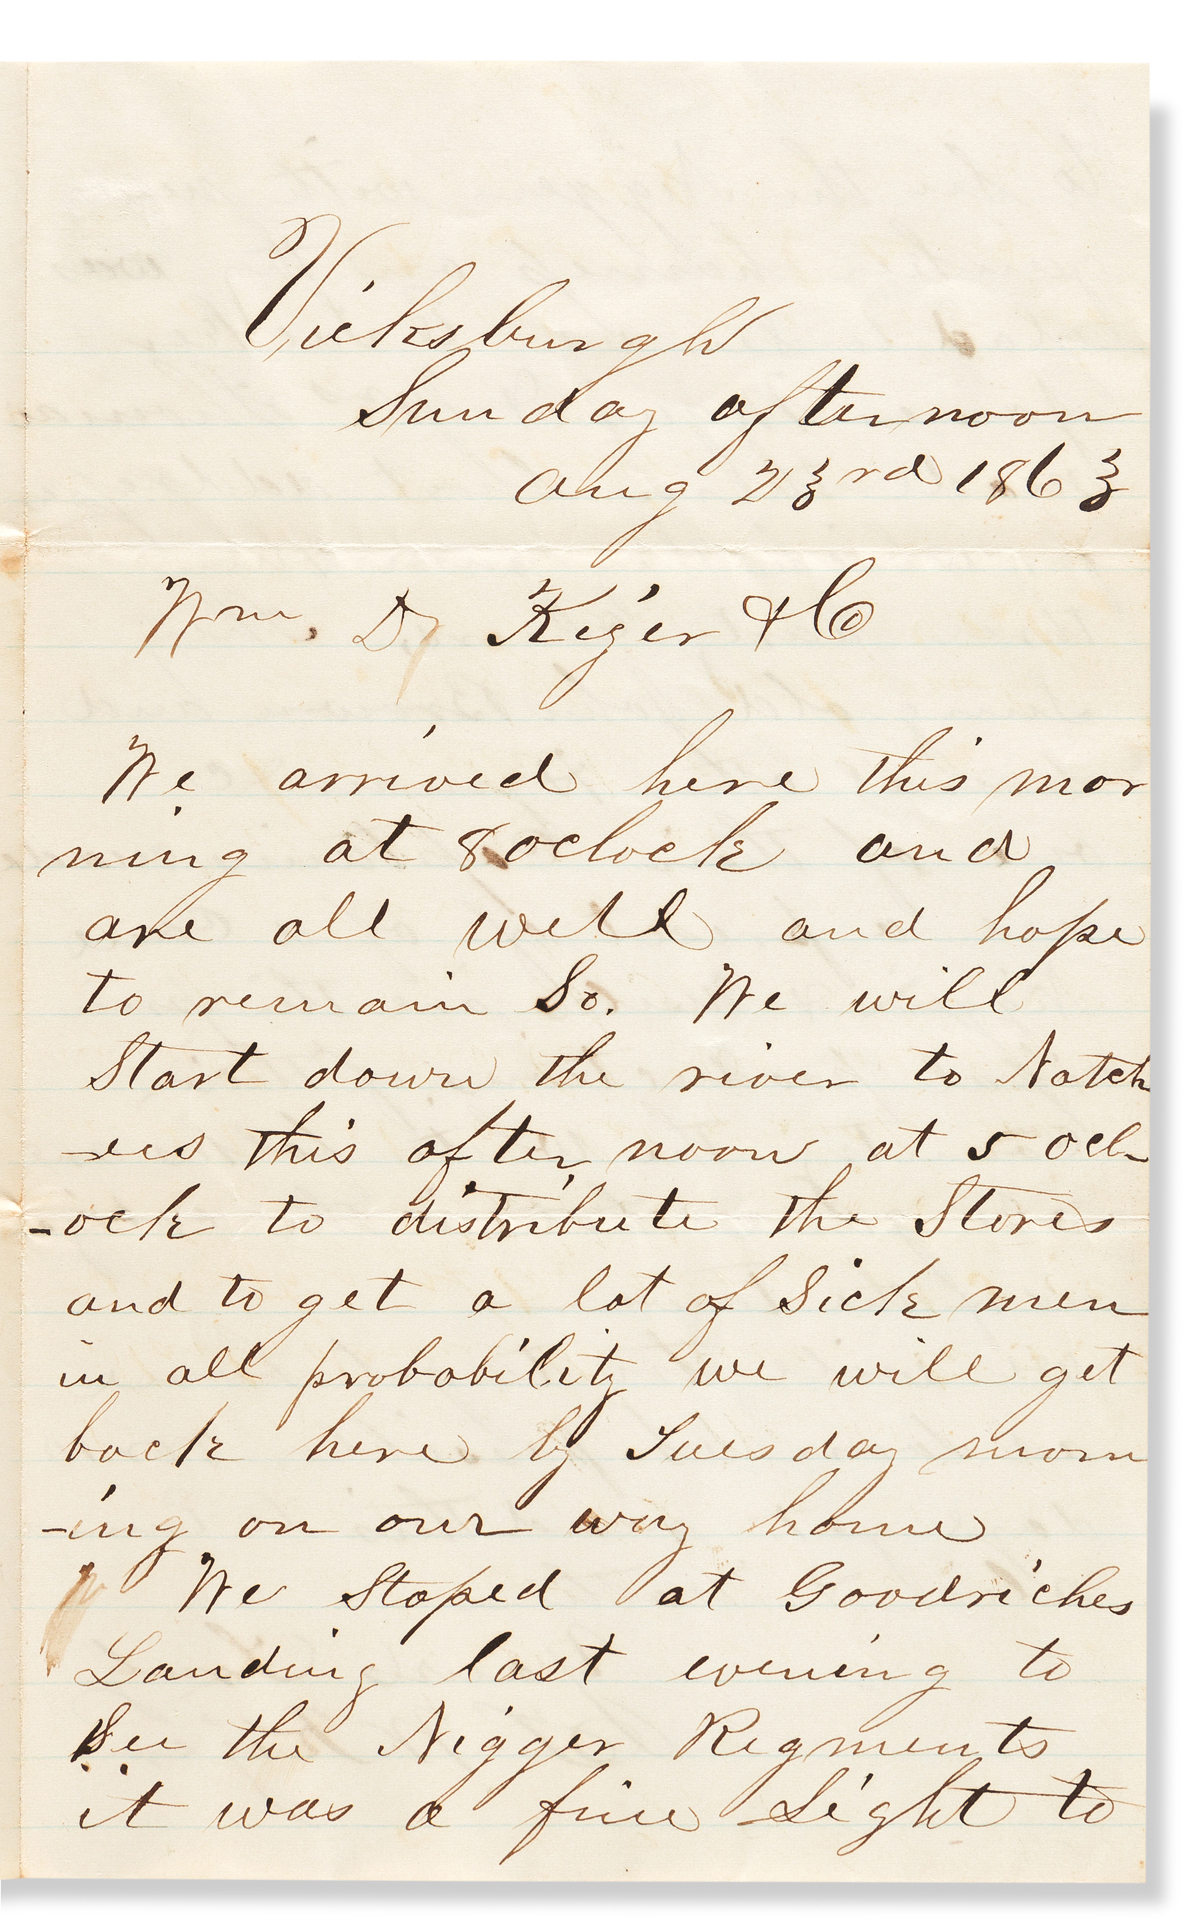 (CIVIL WAR--INDIANA.) Thomas W. Kizer. Letter describing an Indiana Sanitary Commission visit to a Colored Regiment.